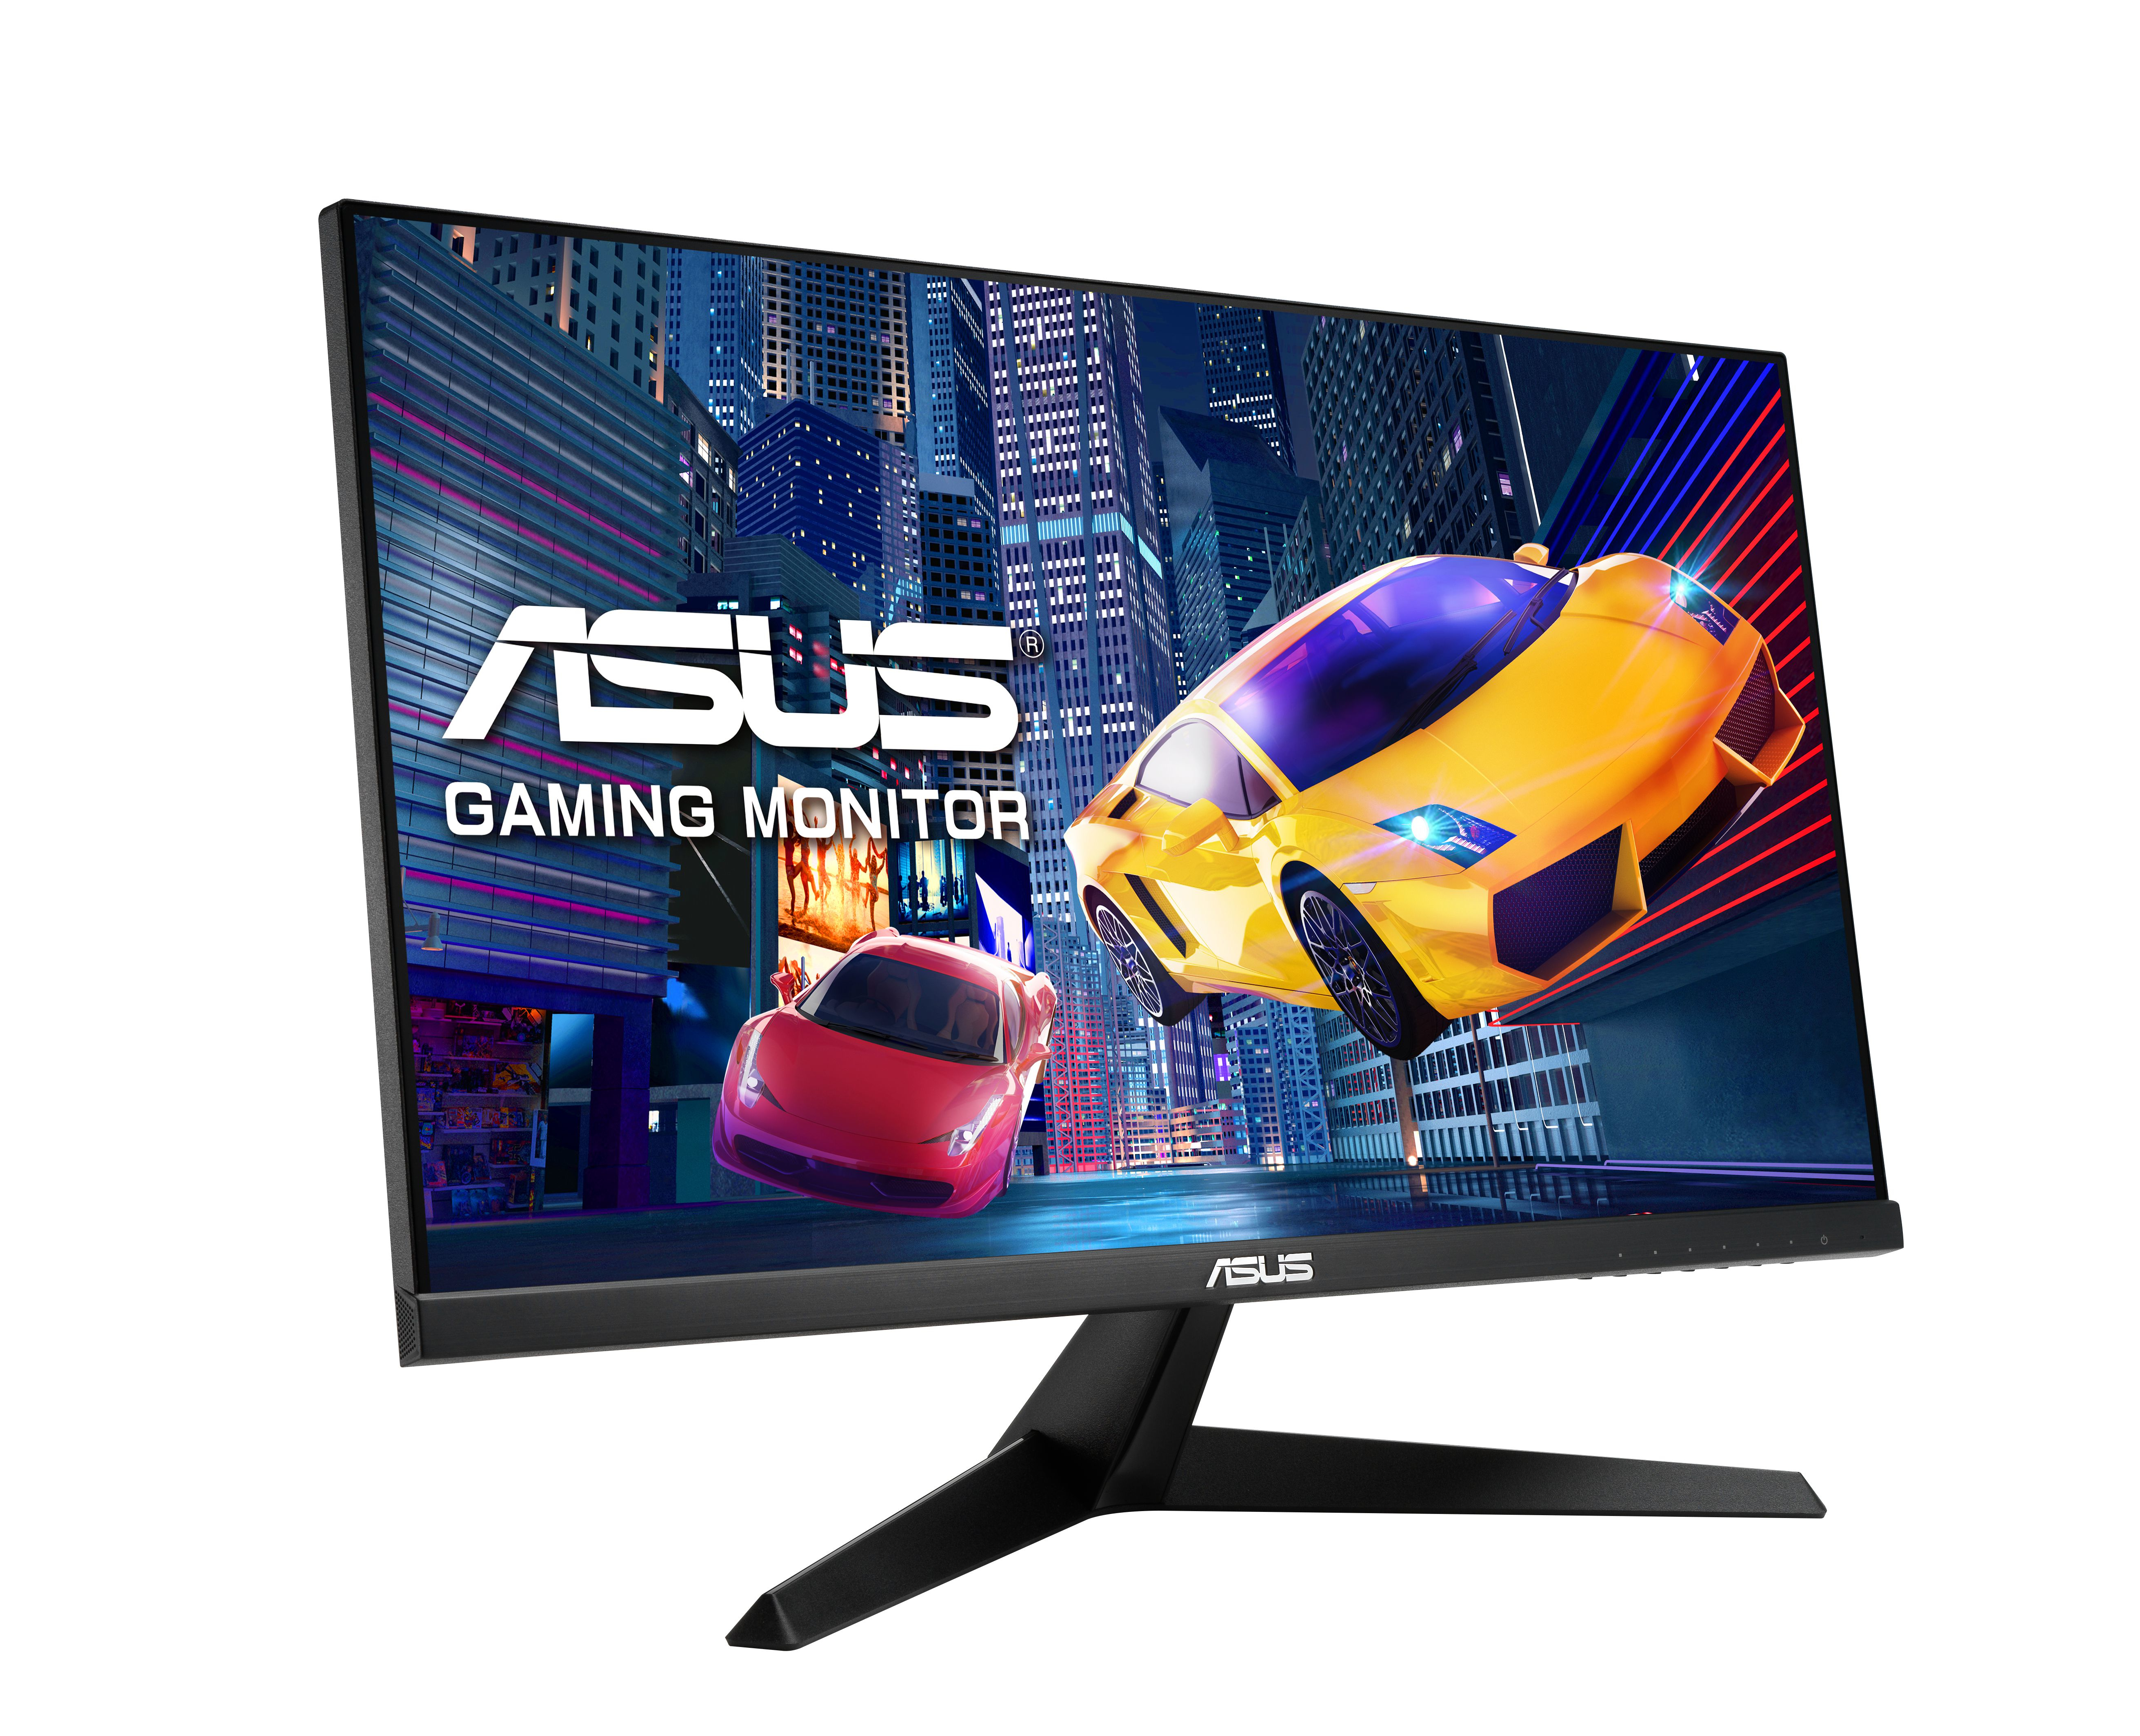 ASUS VY249HE - LED-Monitor - 60.5 cm (23.8") - 1920 x 1080 Full HD (1080p)